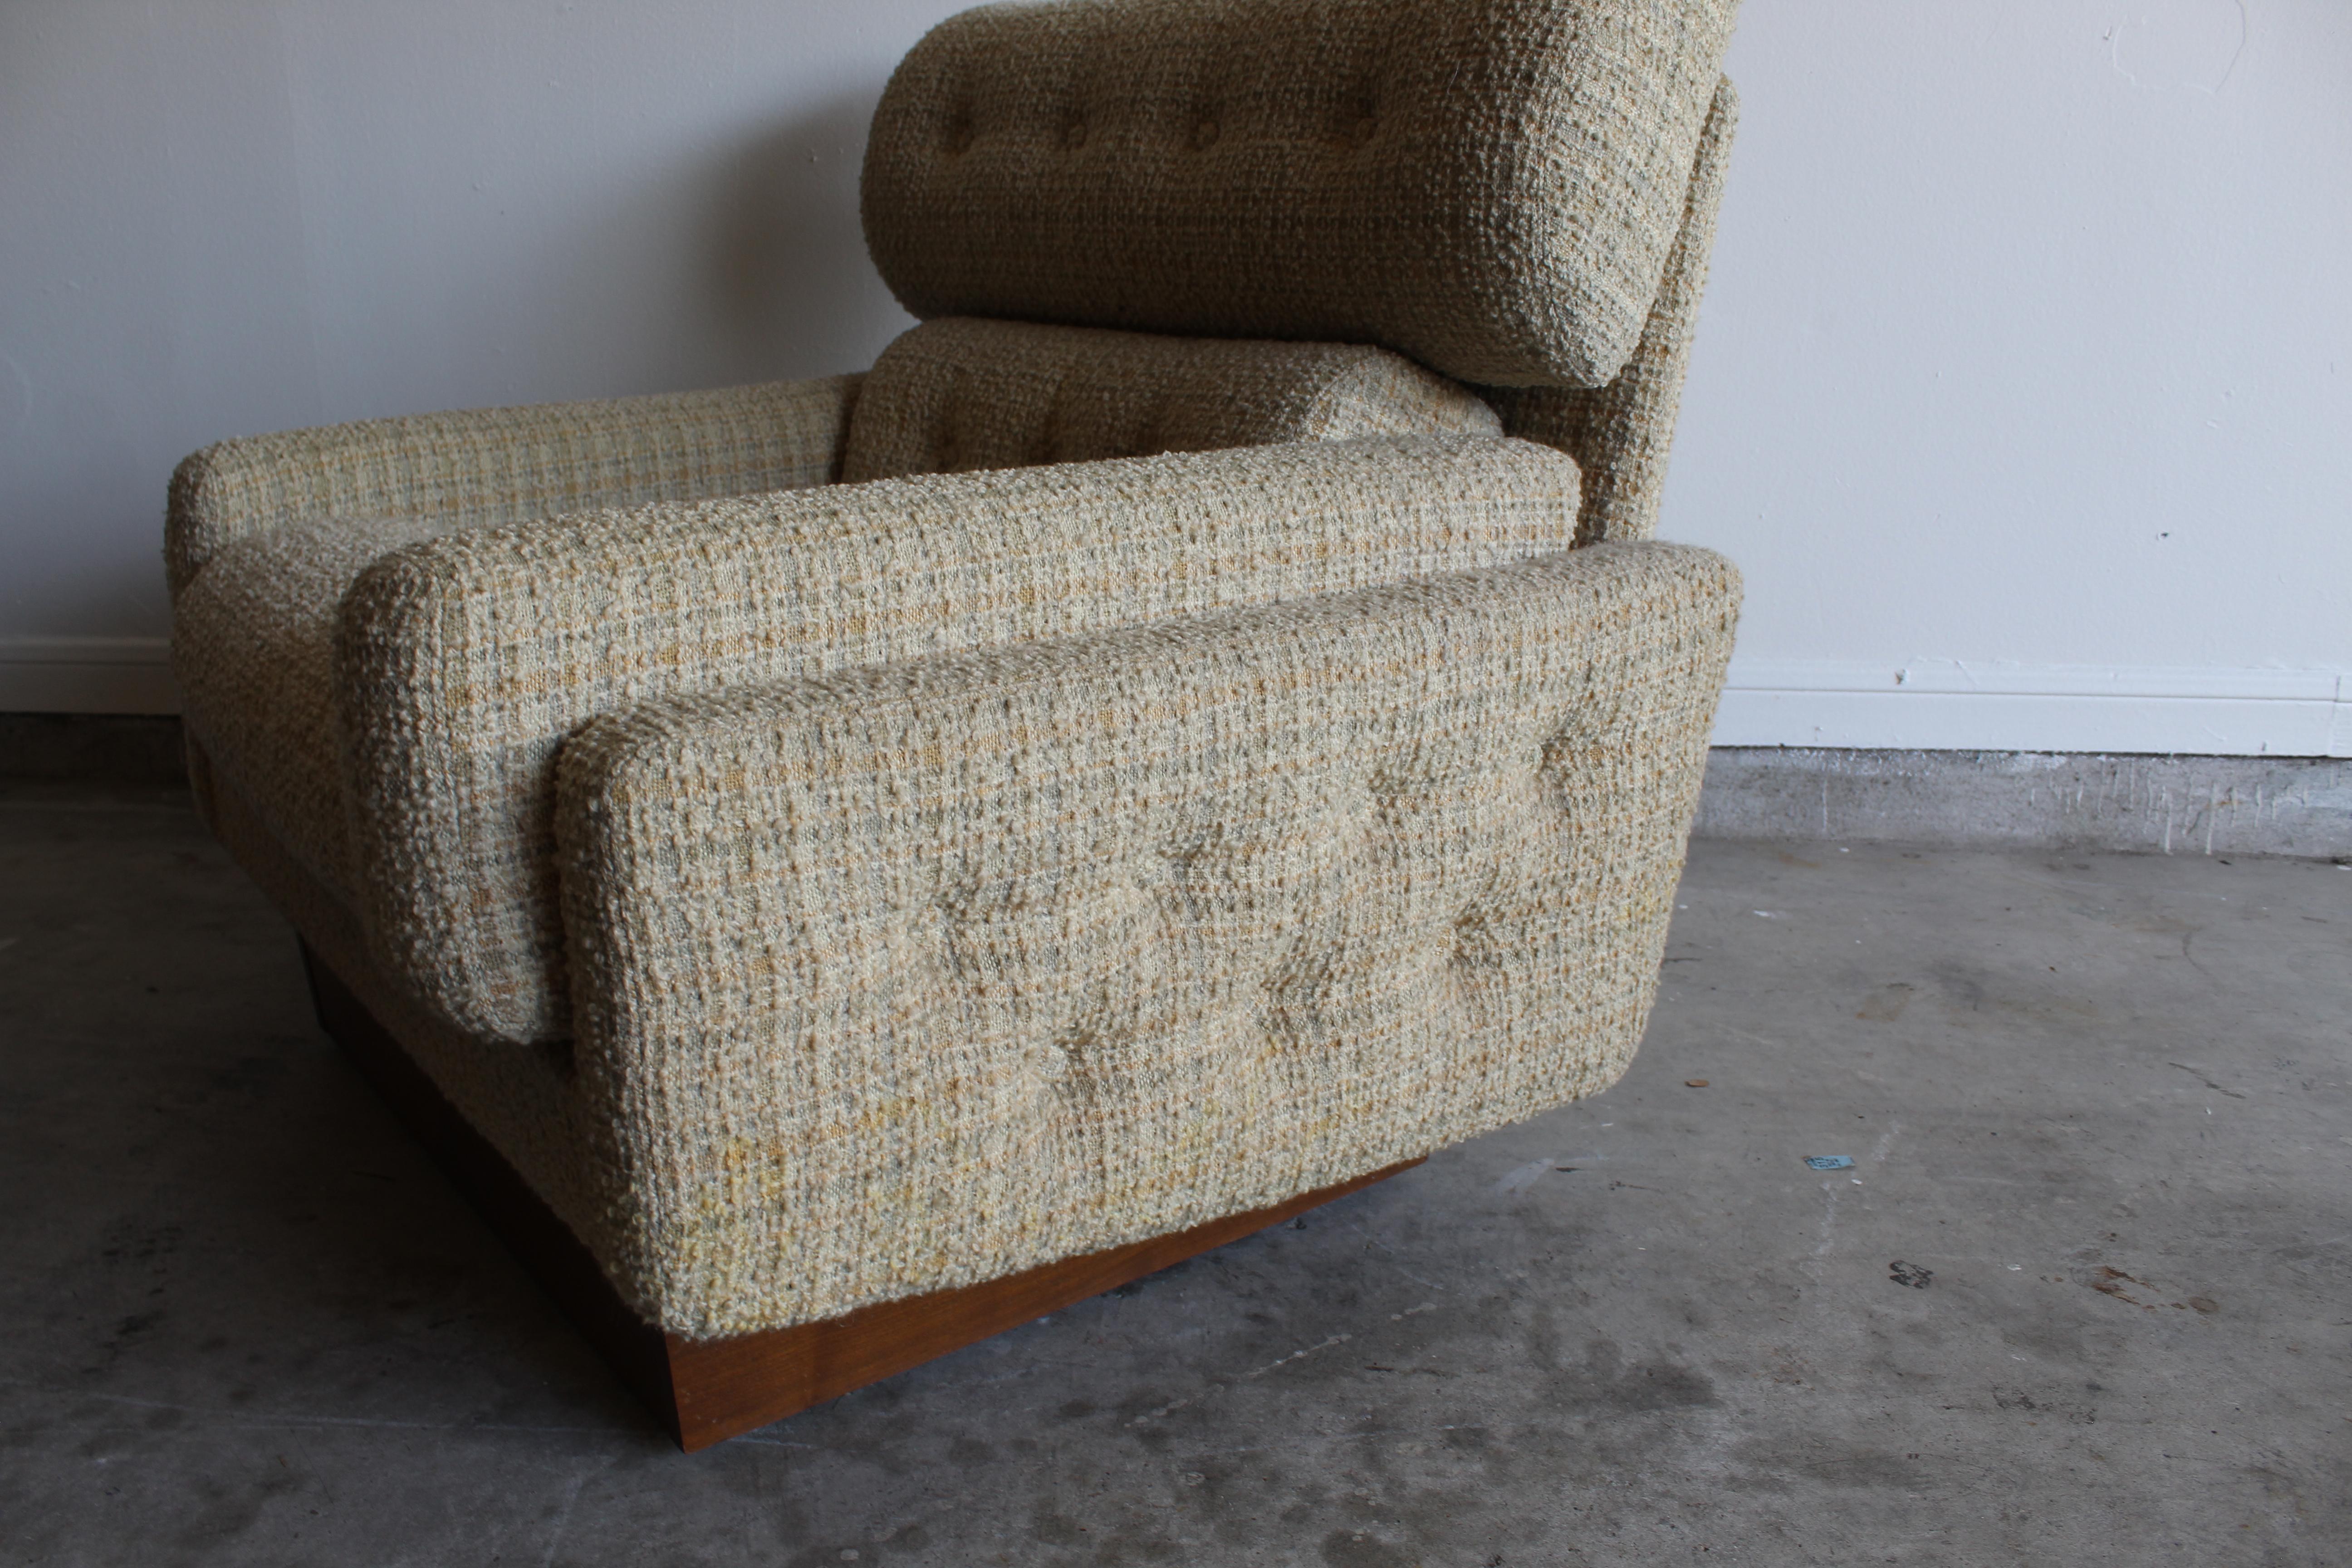 Vintage 1970s Lounge Chair with Plinth Base In Good Condition For Sale In Houston, TX